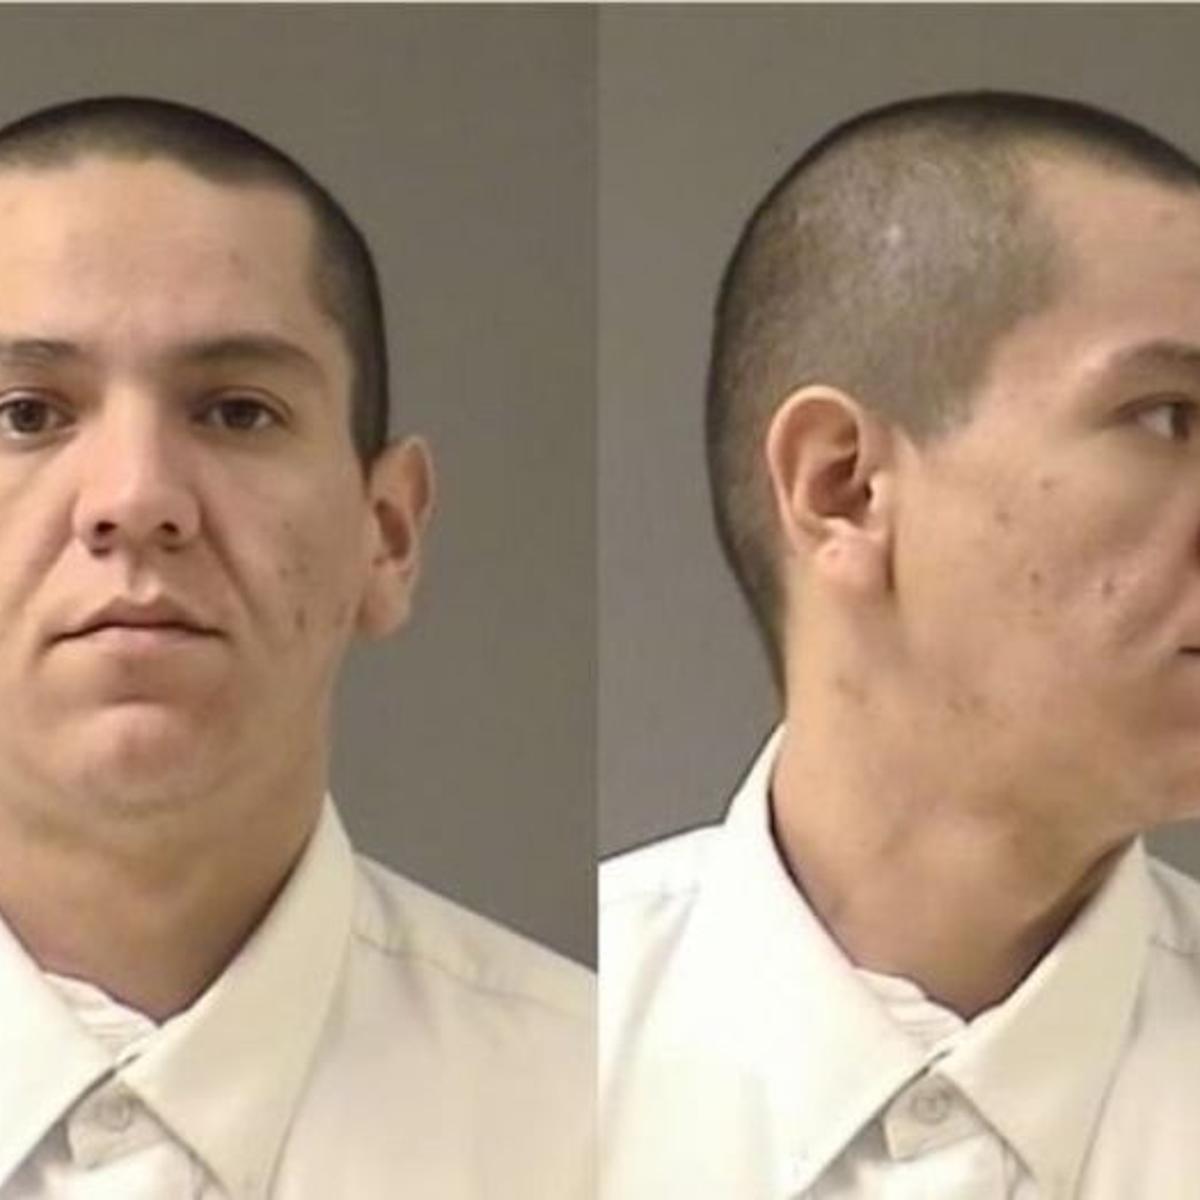 Craigslist Sting In Billings Leads To Child Sex Abuse Charge